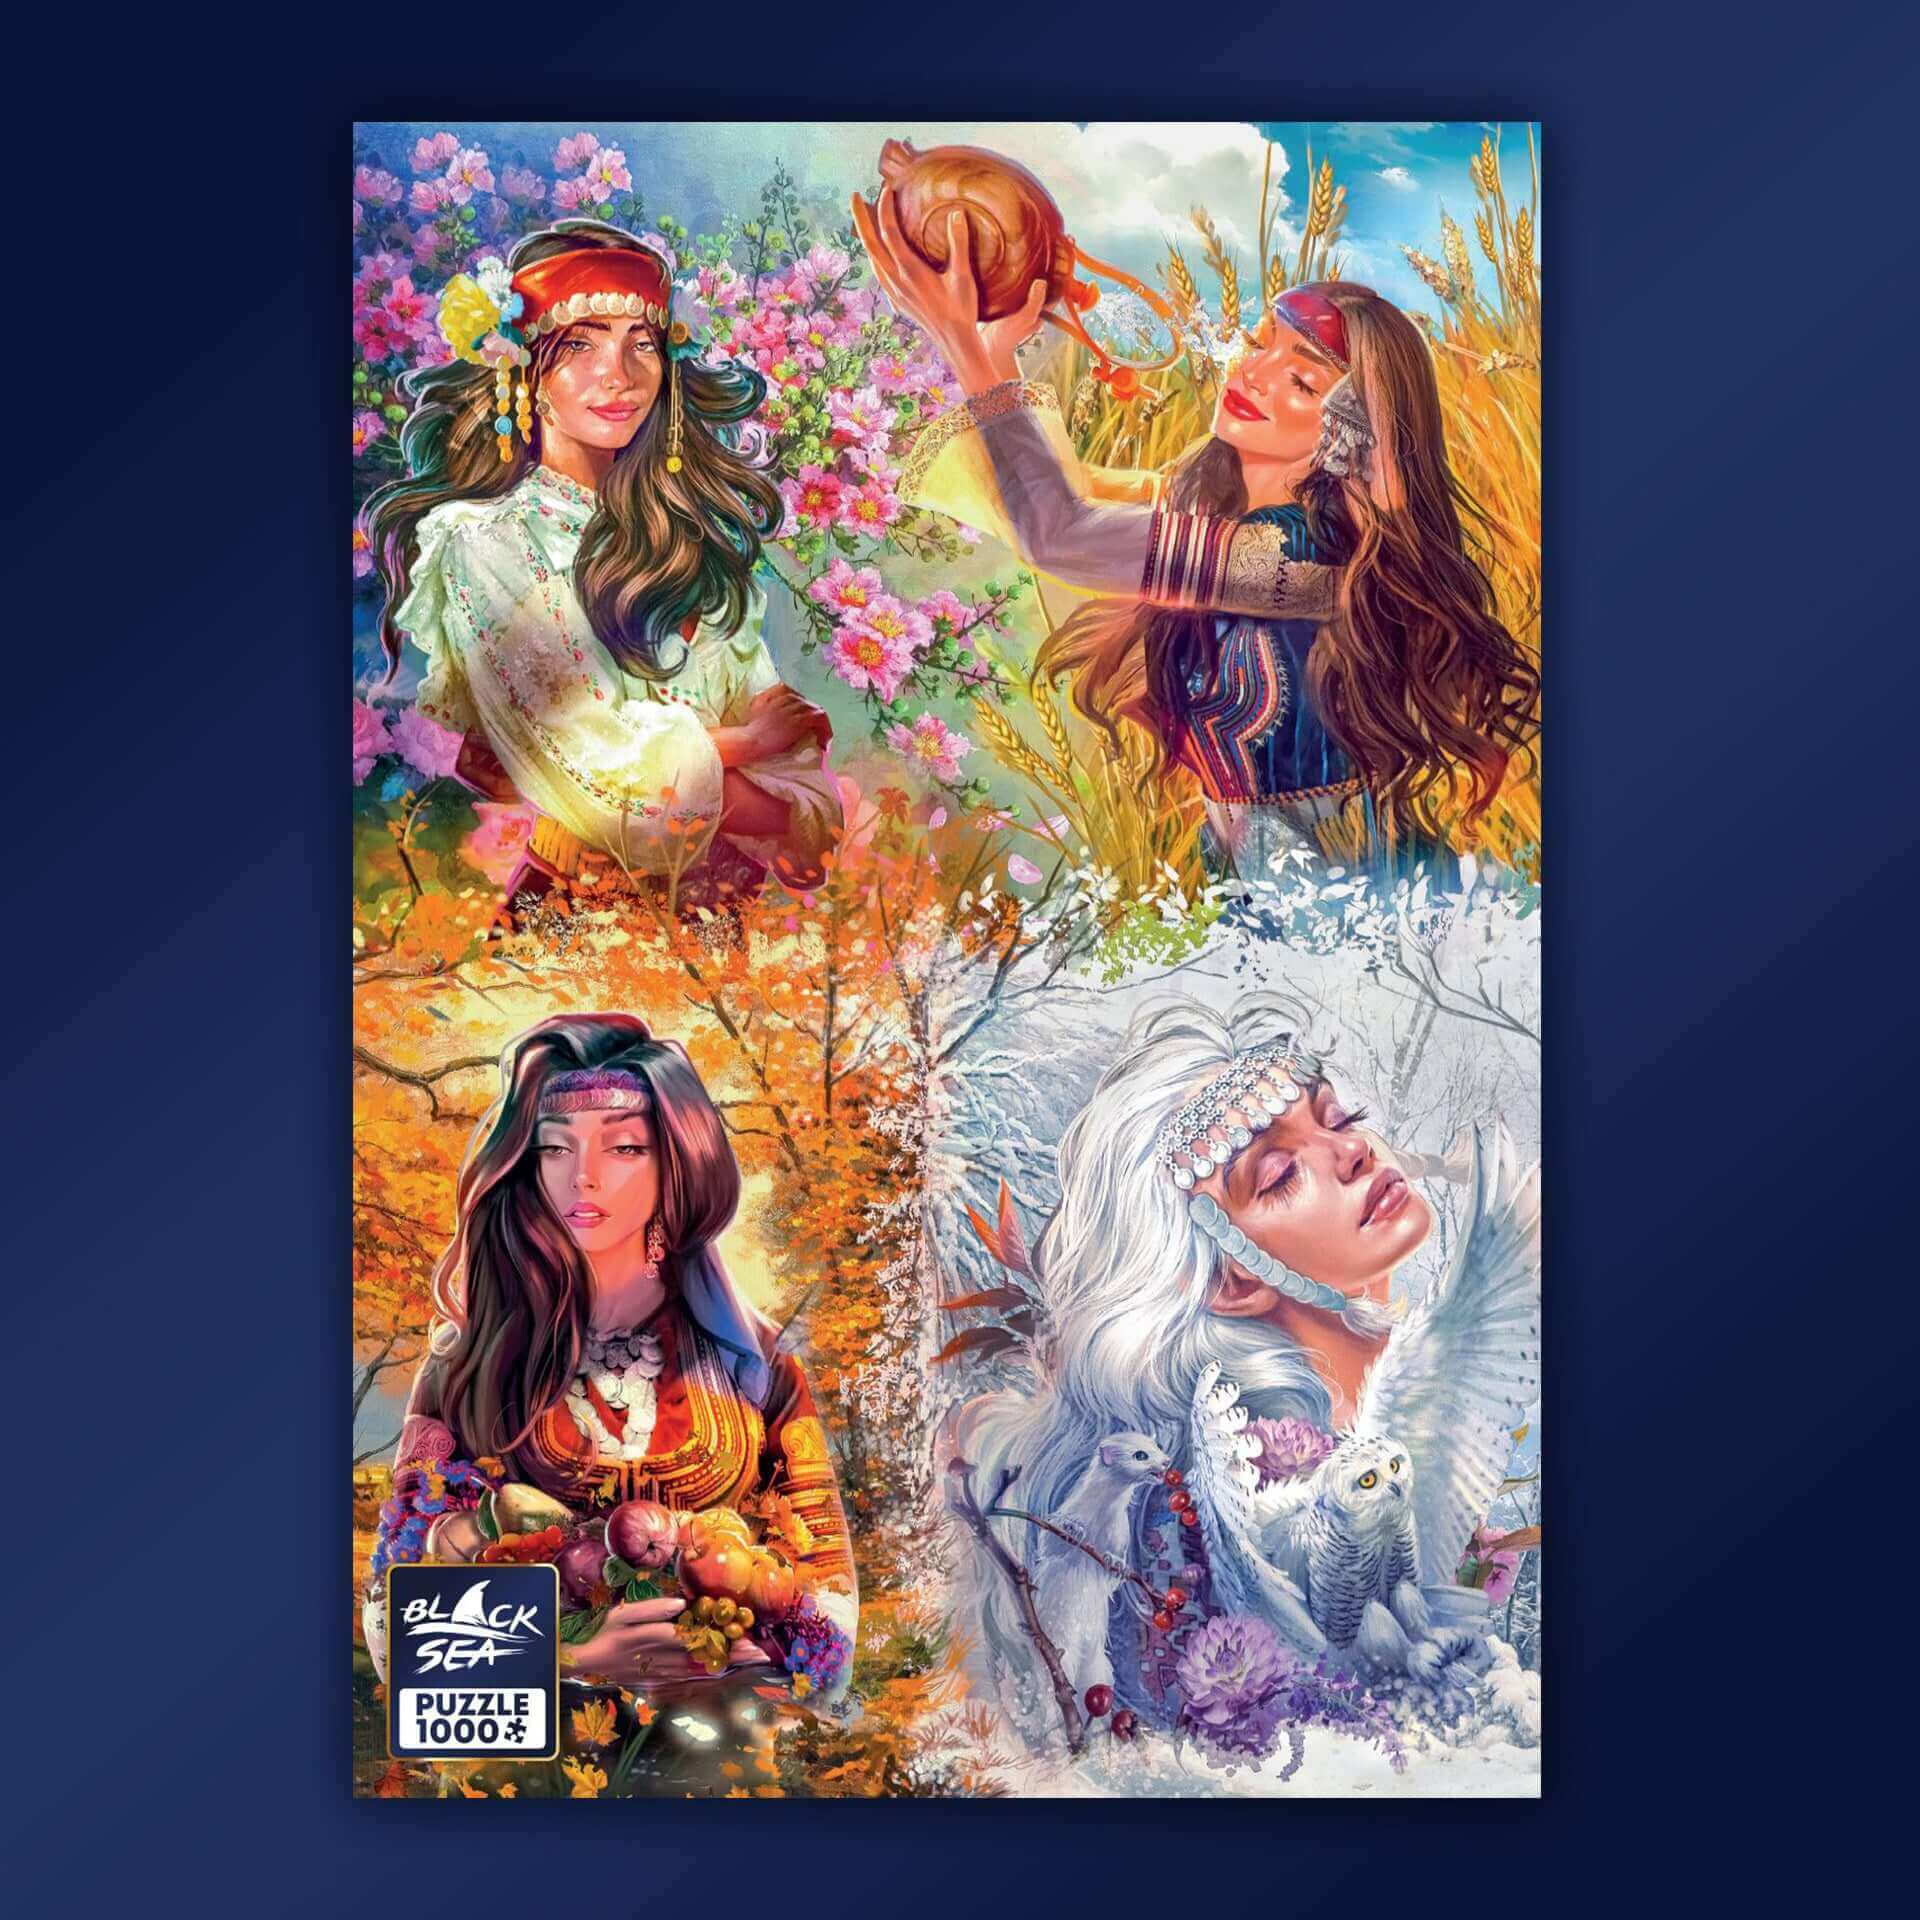 Puzzle Black Sea Premium 1000 pieces - Bulgaria in Four Seasons, This 1000 pieces puzzle describes the enchanting Bulgaria in all seasons. With the alternation of the seasons, breathtaking landscapes alternate as well. Spring showers the country with frag